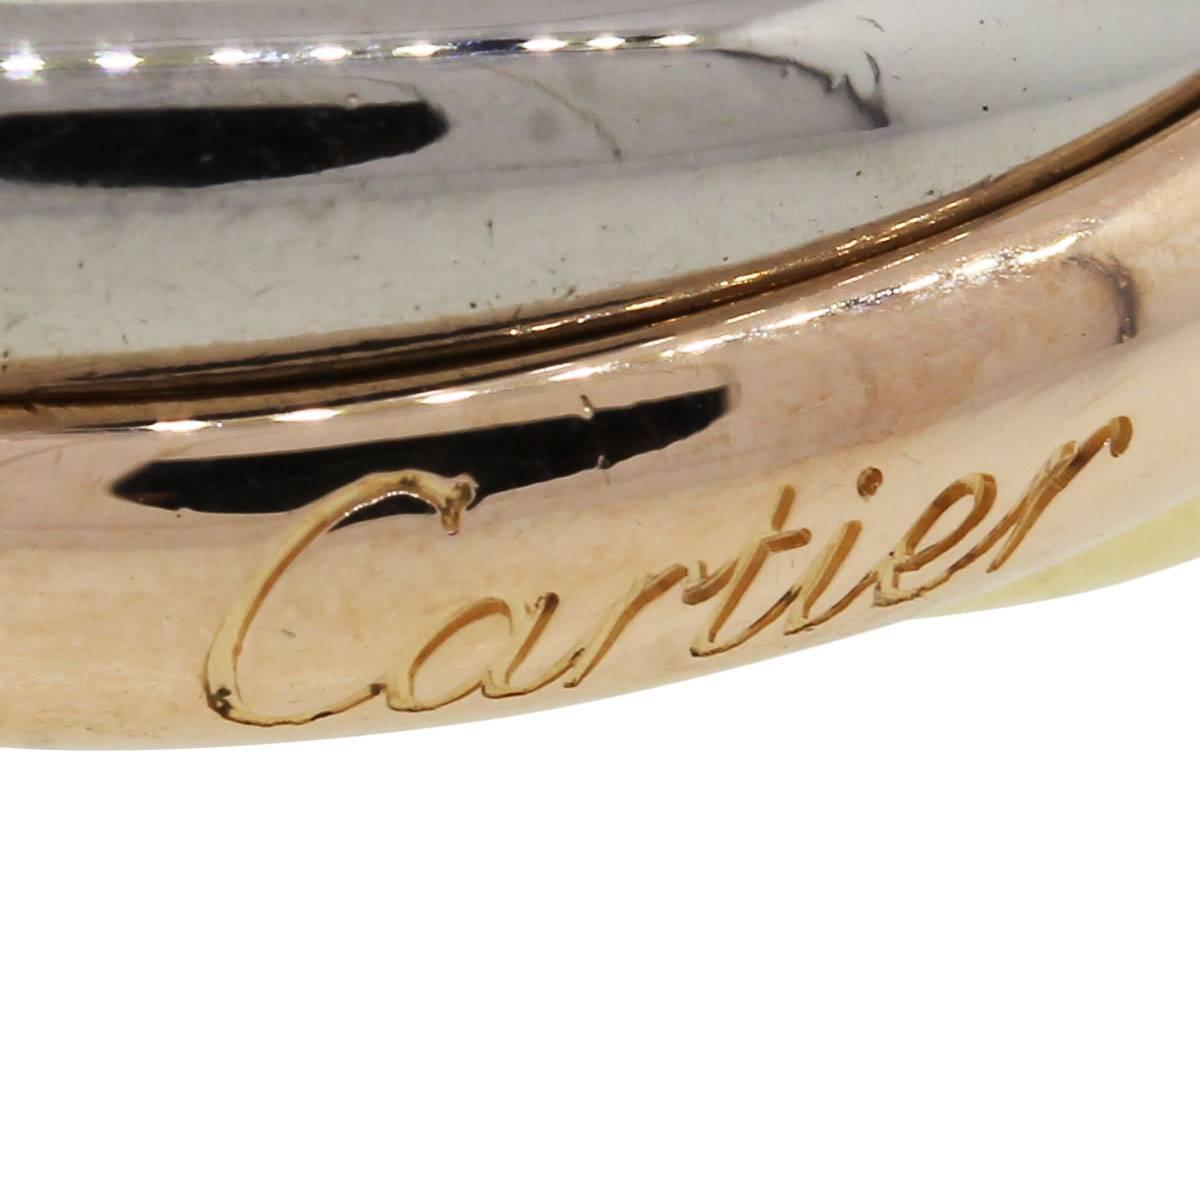 Designer	Cartier
Material	18k white, yellow and rose gold
Ring Size	Cartier size 64 (9.50)
Ring Measurements	1" x 0.33" x 1"
Total Weight	11.8g (7.6g)
Additional Details	Item includes Cartier box!
SKU	G5802